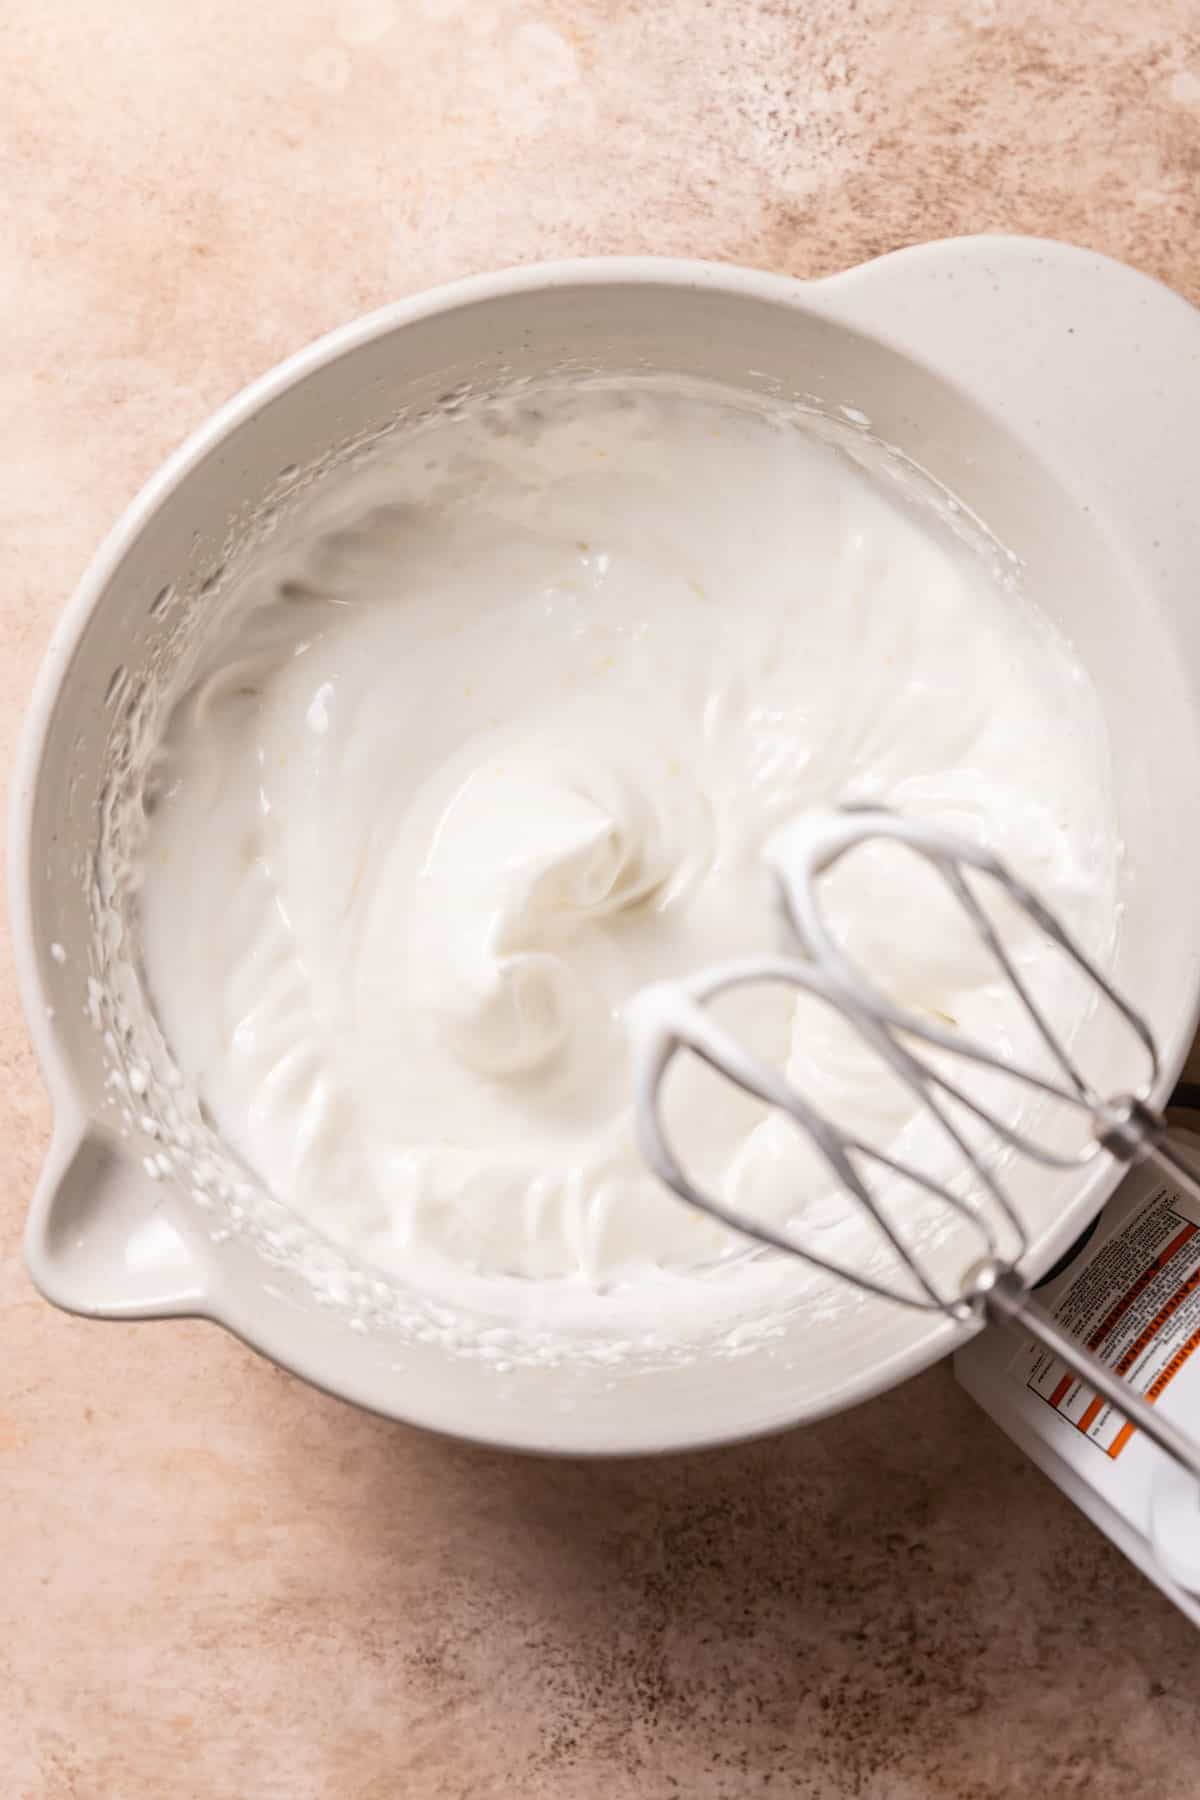 egg white meringue in a bowl with an electric mixer nearby.